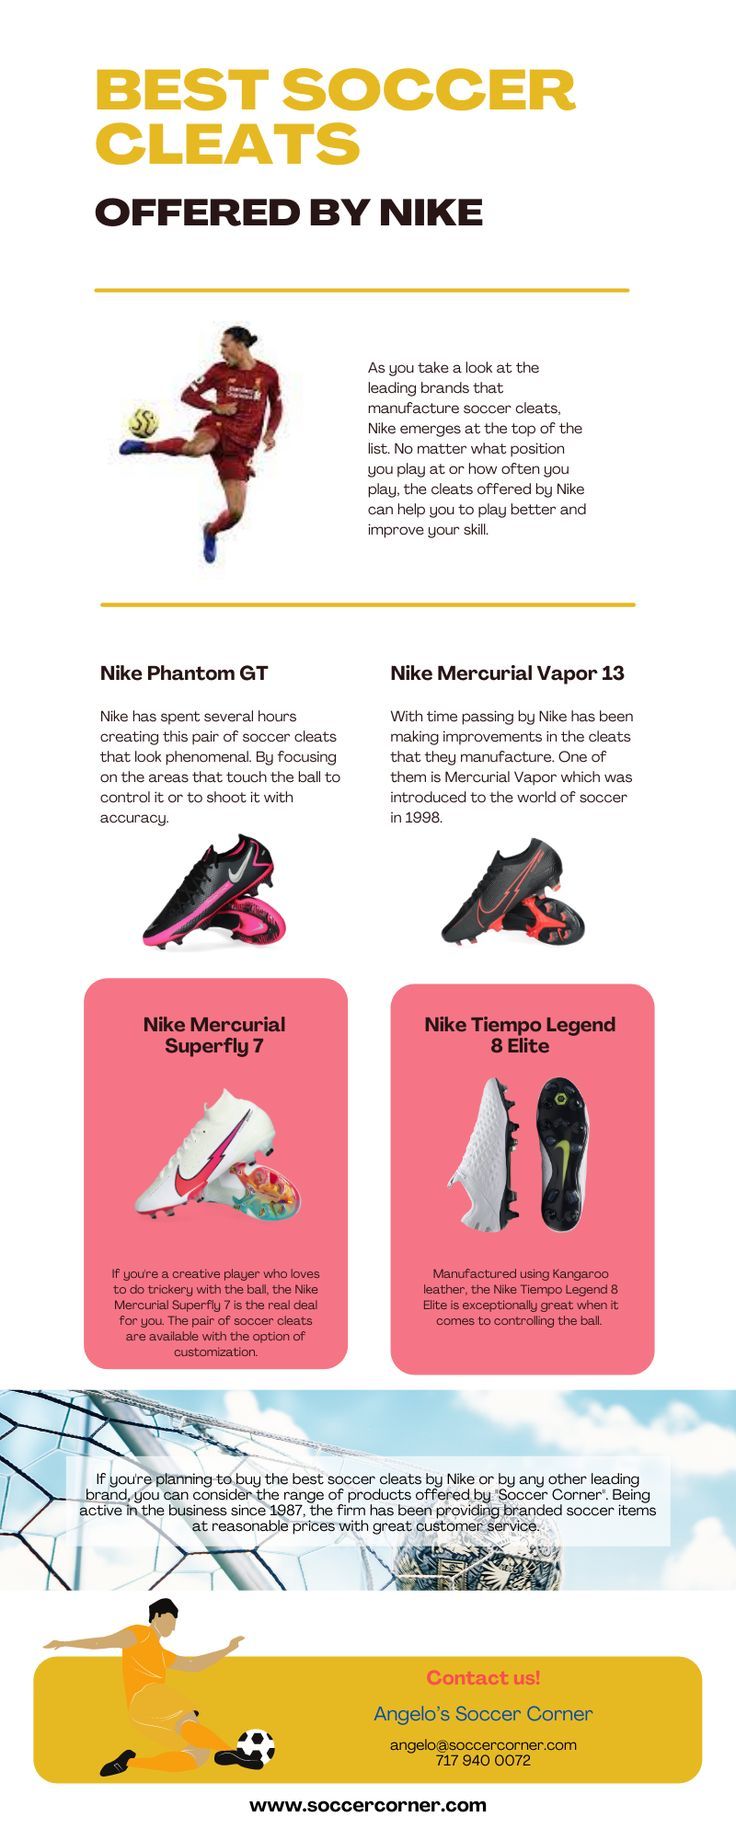 Best Soccer Cleats Offered By Nike